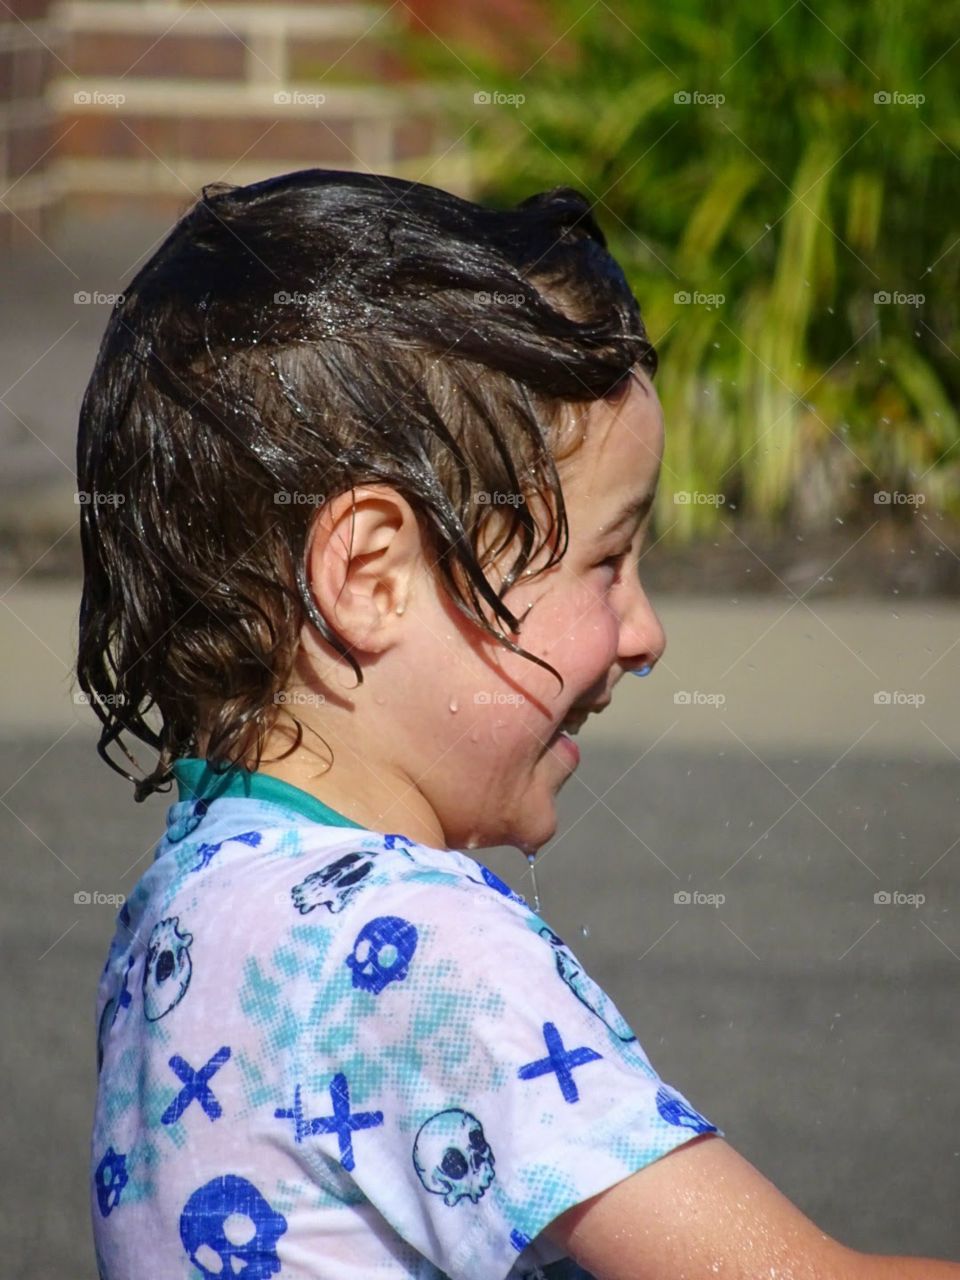 closeup of a young boy enjoying water play and happy being soaking wet